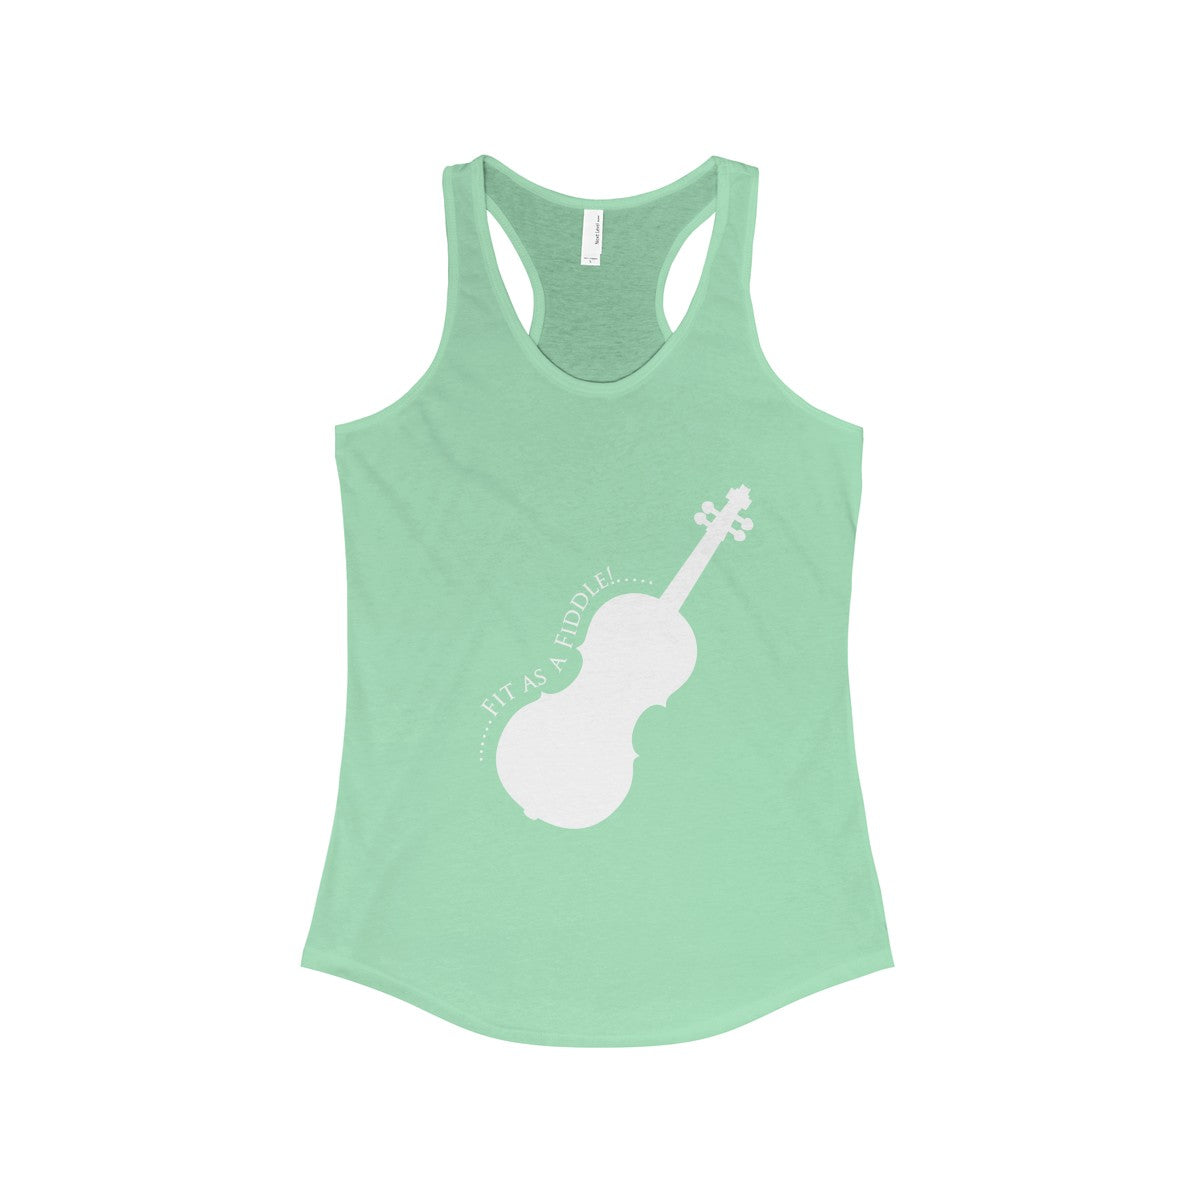 Fit as a Fiddle! Women's The Ideal Racerback Tank-Tank Top-PureDesignTees